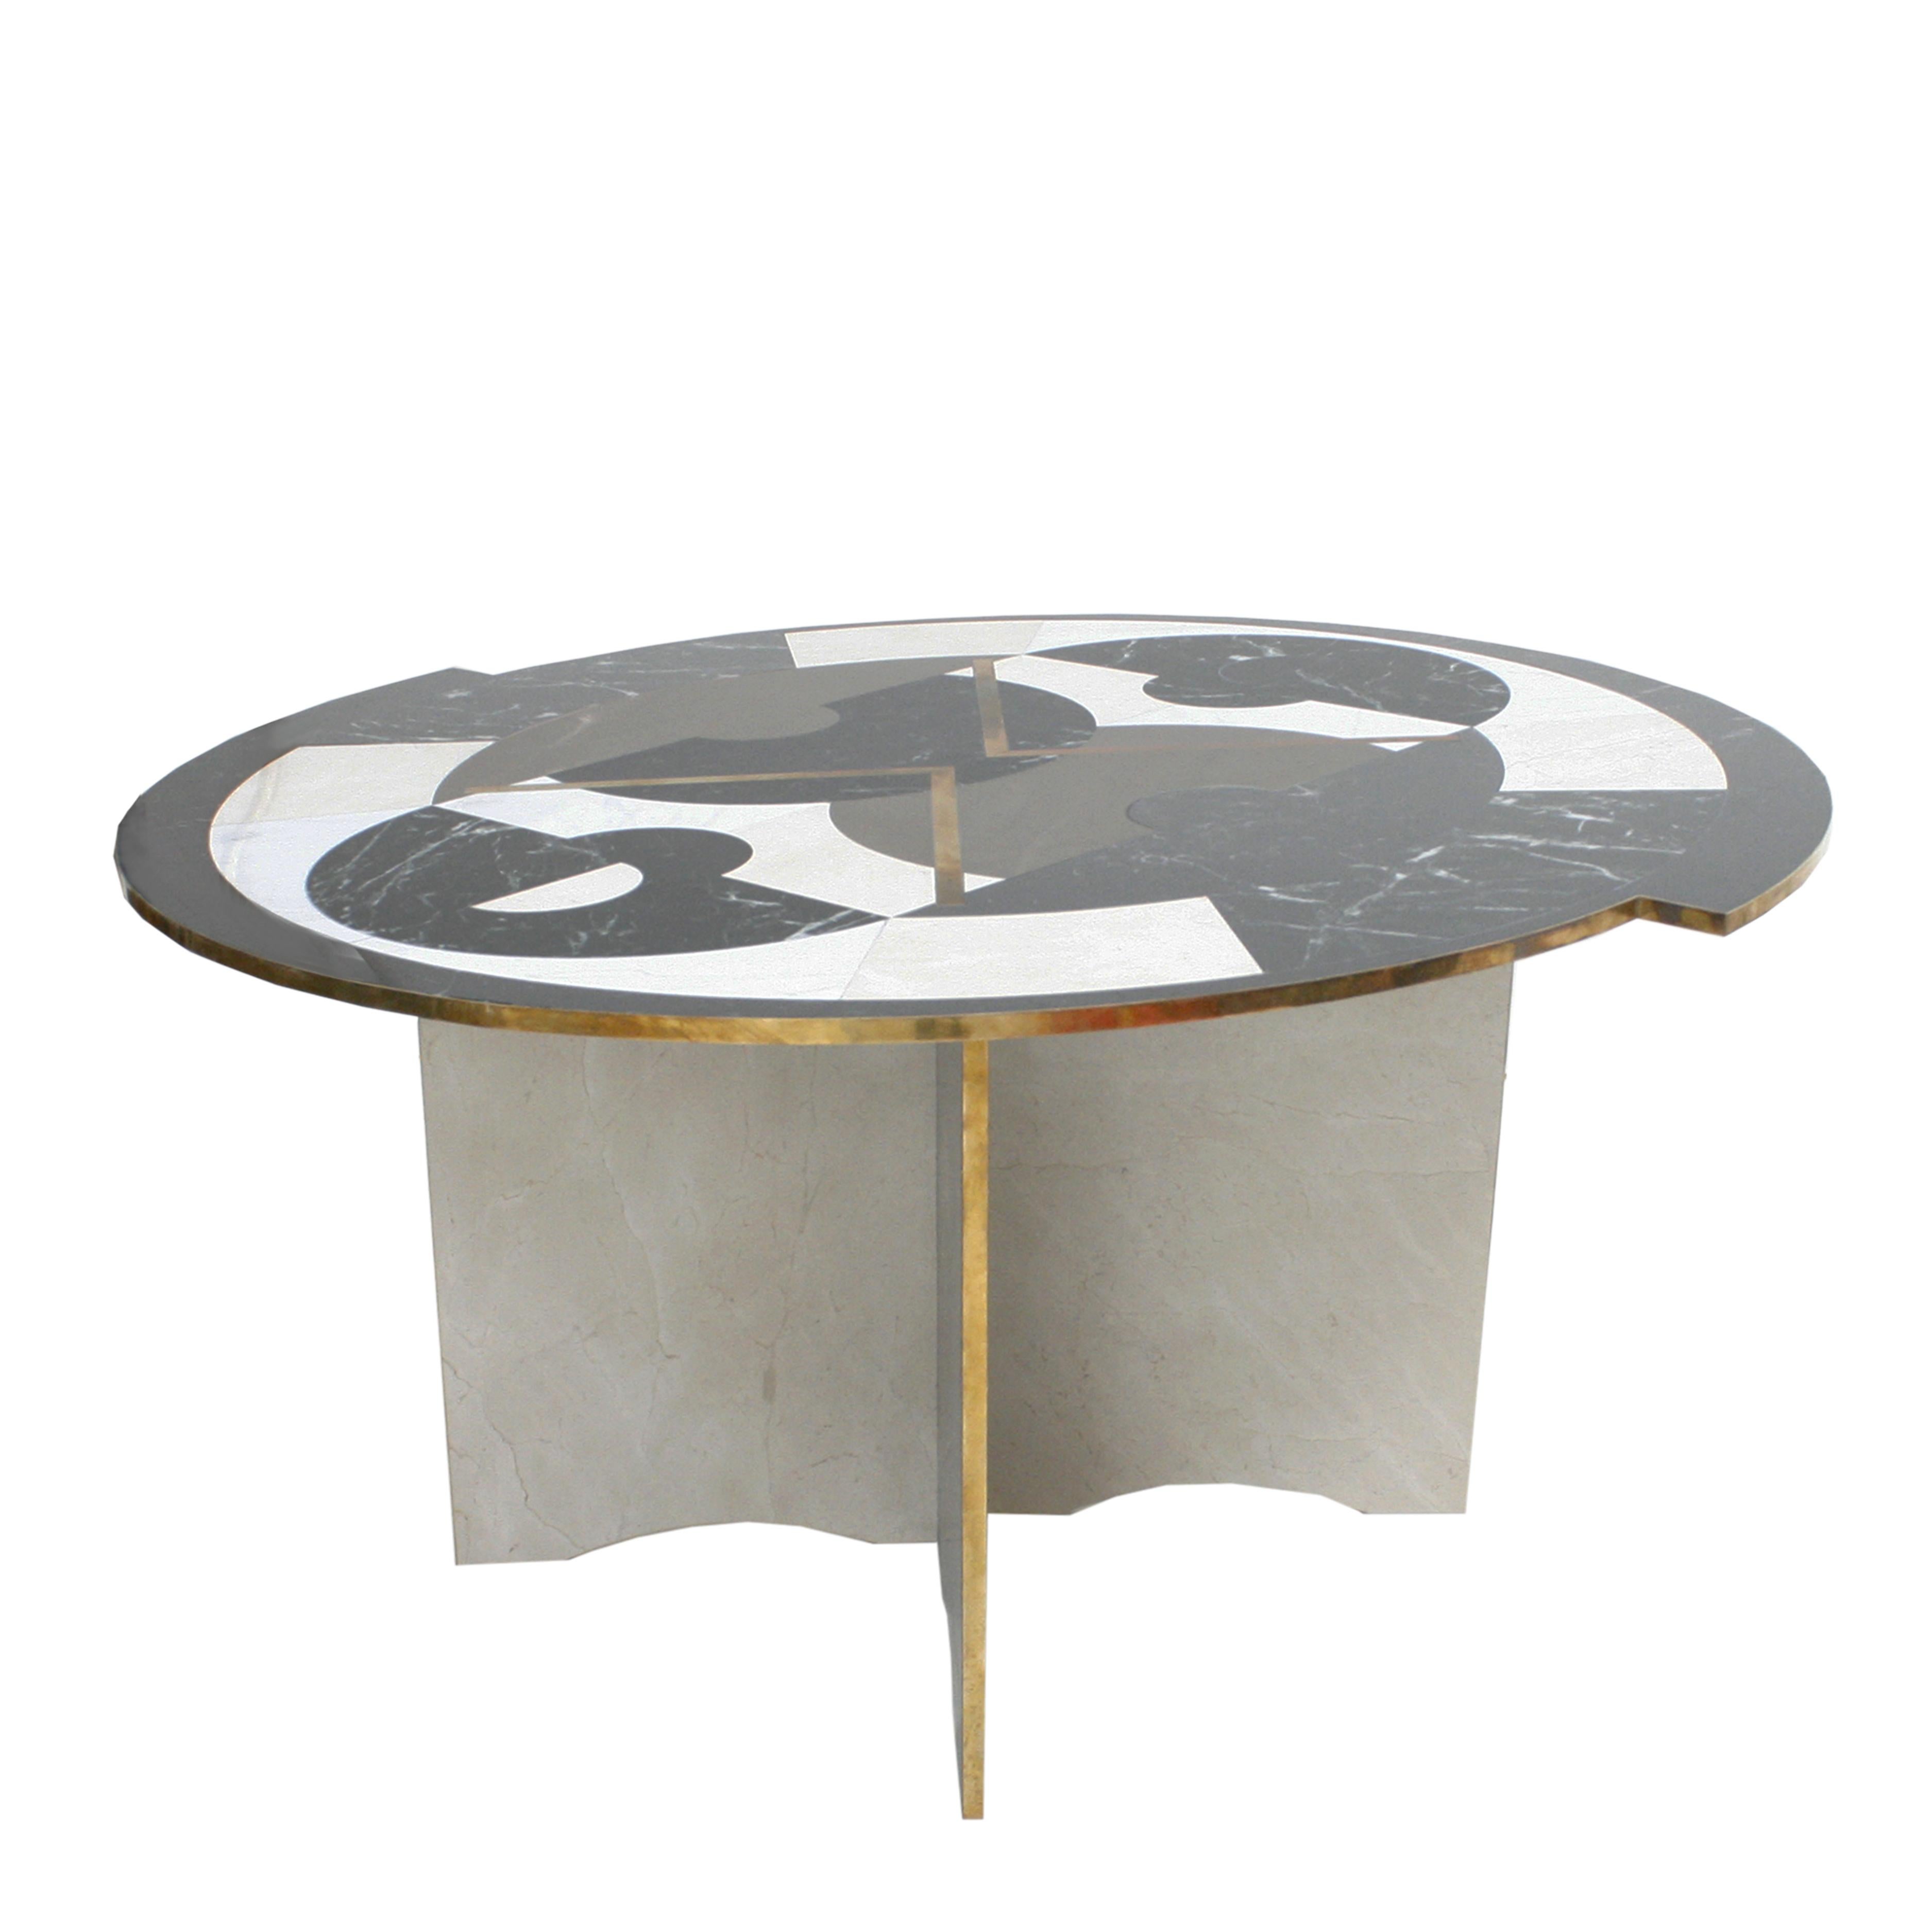 Italian round table designed and produced by L.A. Studio. Made of white, black and grey marble finished with brass details. Made in Italy. 

Our main target is customer satisfaction, so we include in the price for this item professional and custom